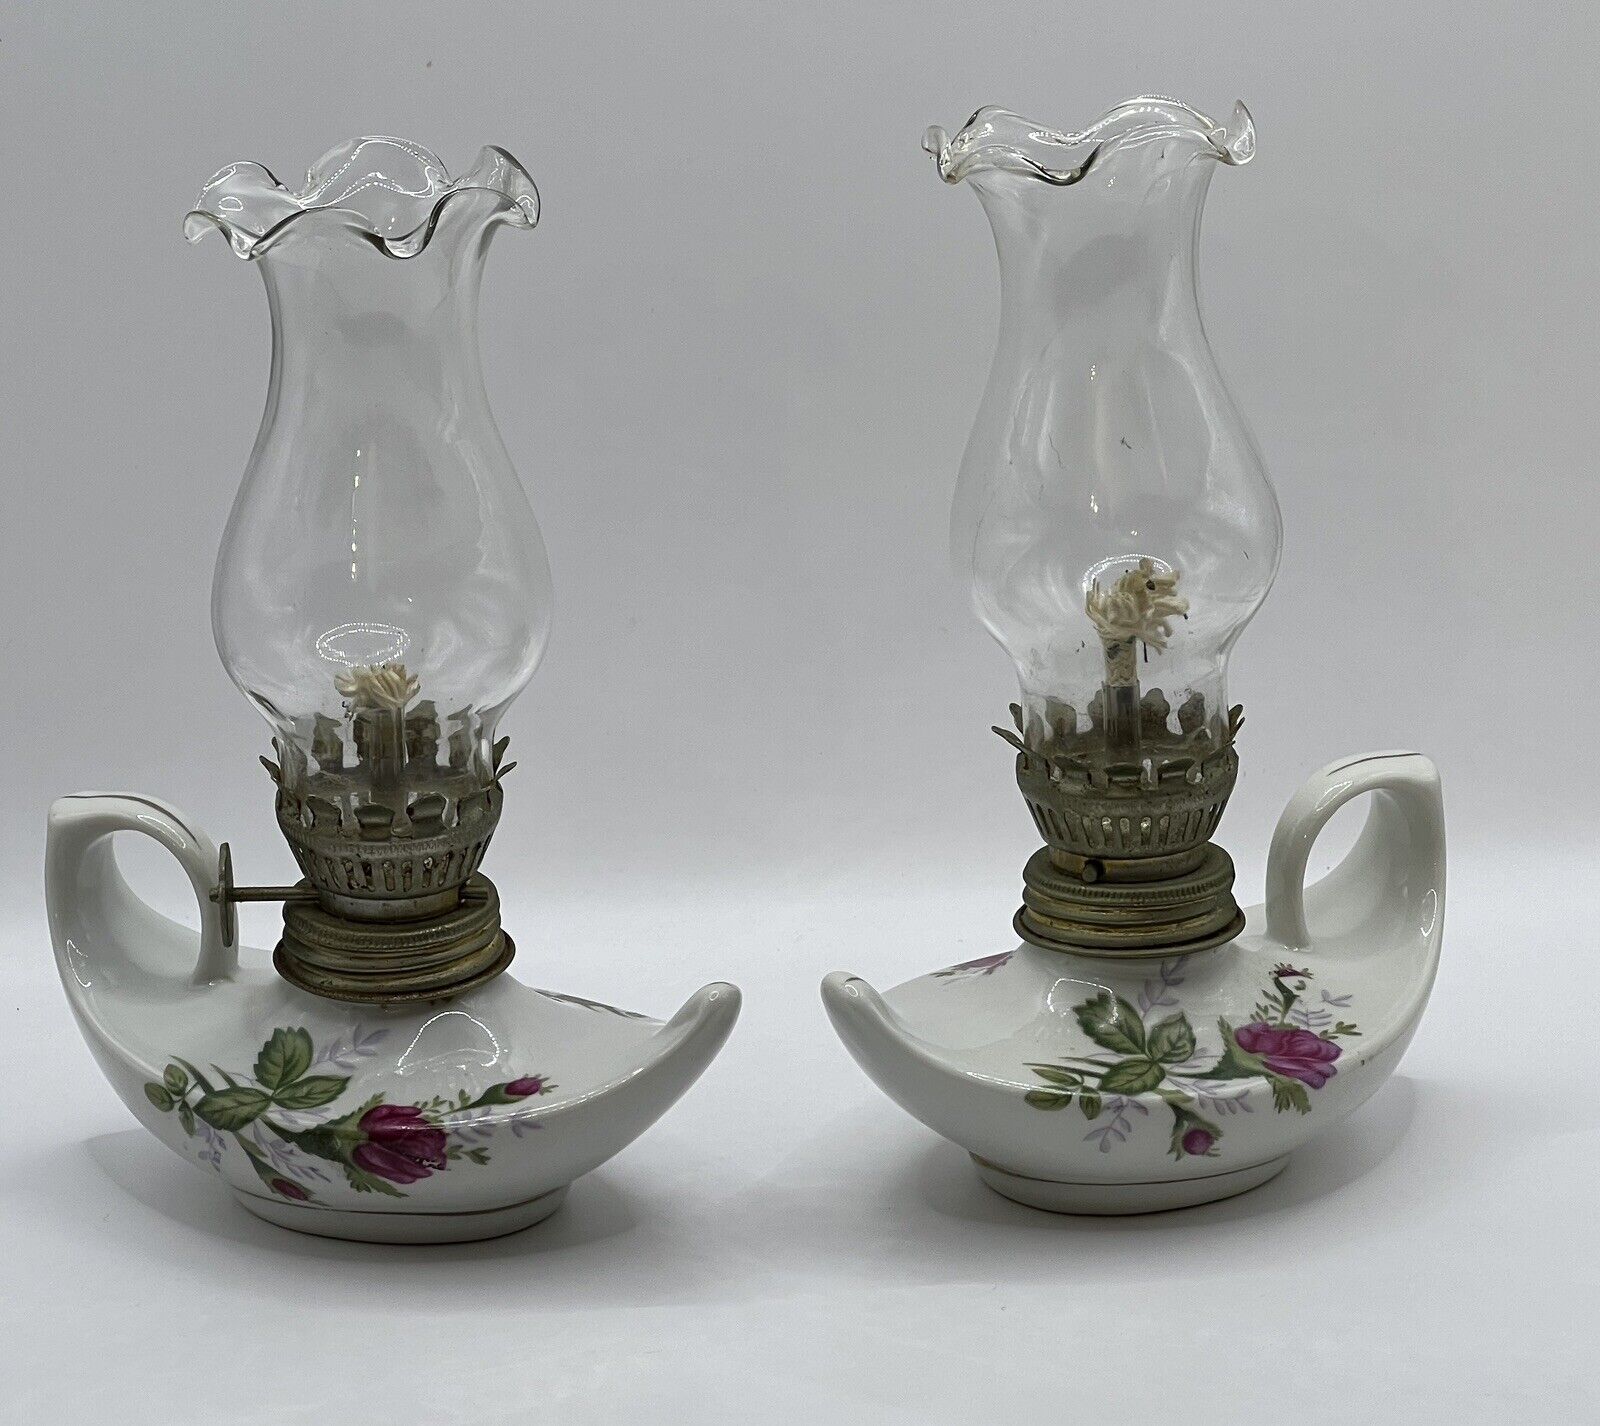 Pair Of Vintage Oil Lamps, Ceramic Aladin Genie Shape Hand Painted Roses 6.5